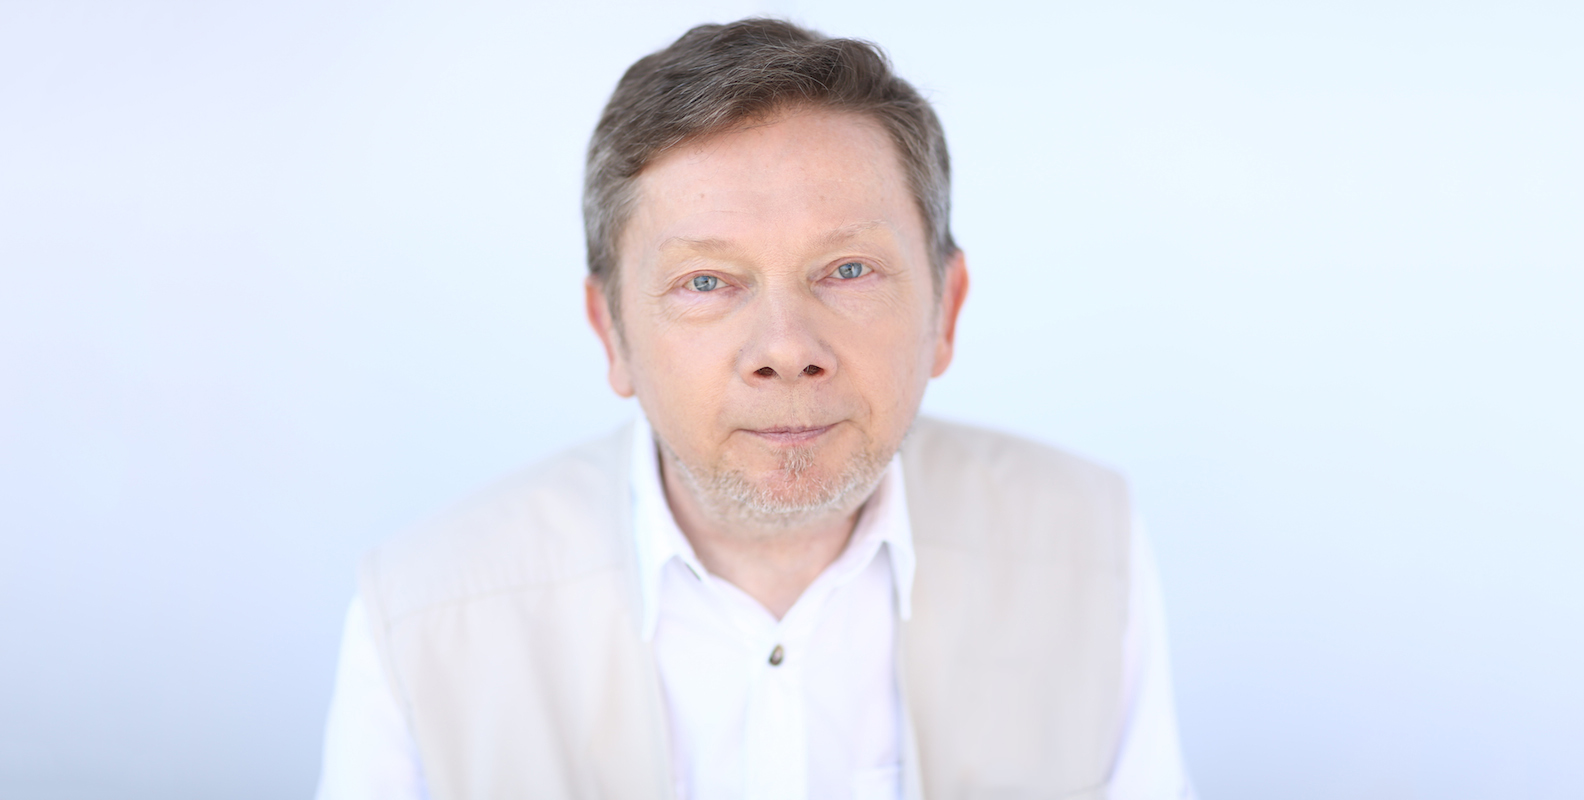 how old is eckhart tolle